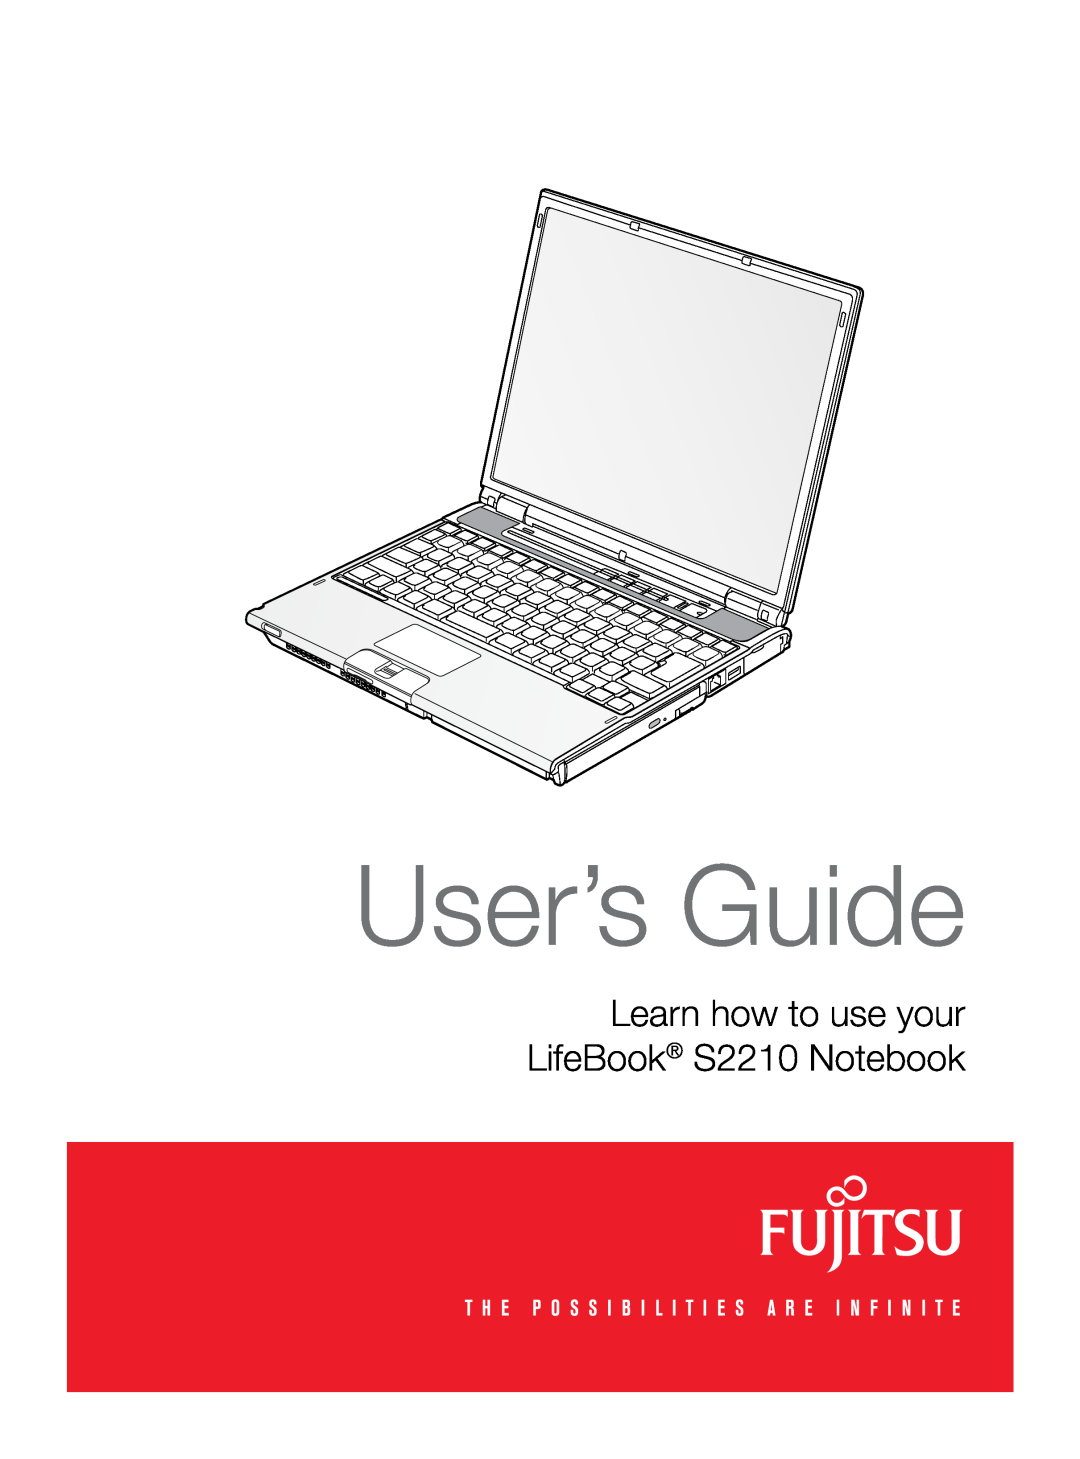 Fujitsu Siemens Computers manual User’s Guide, Learn how to use your LifeBook S2210 Notebook 